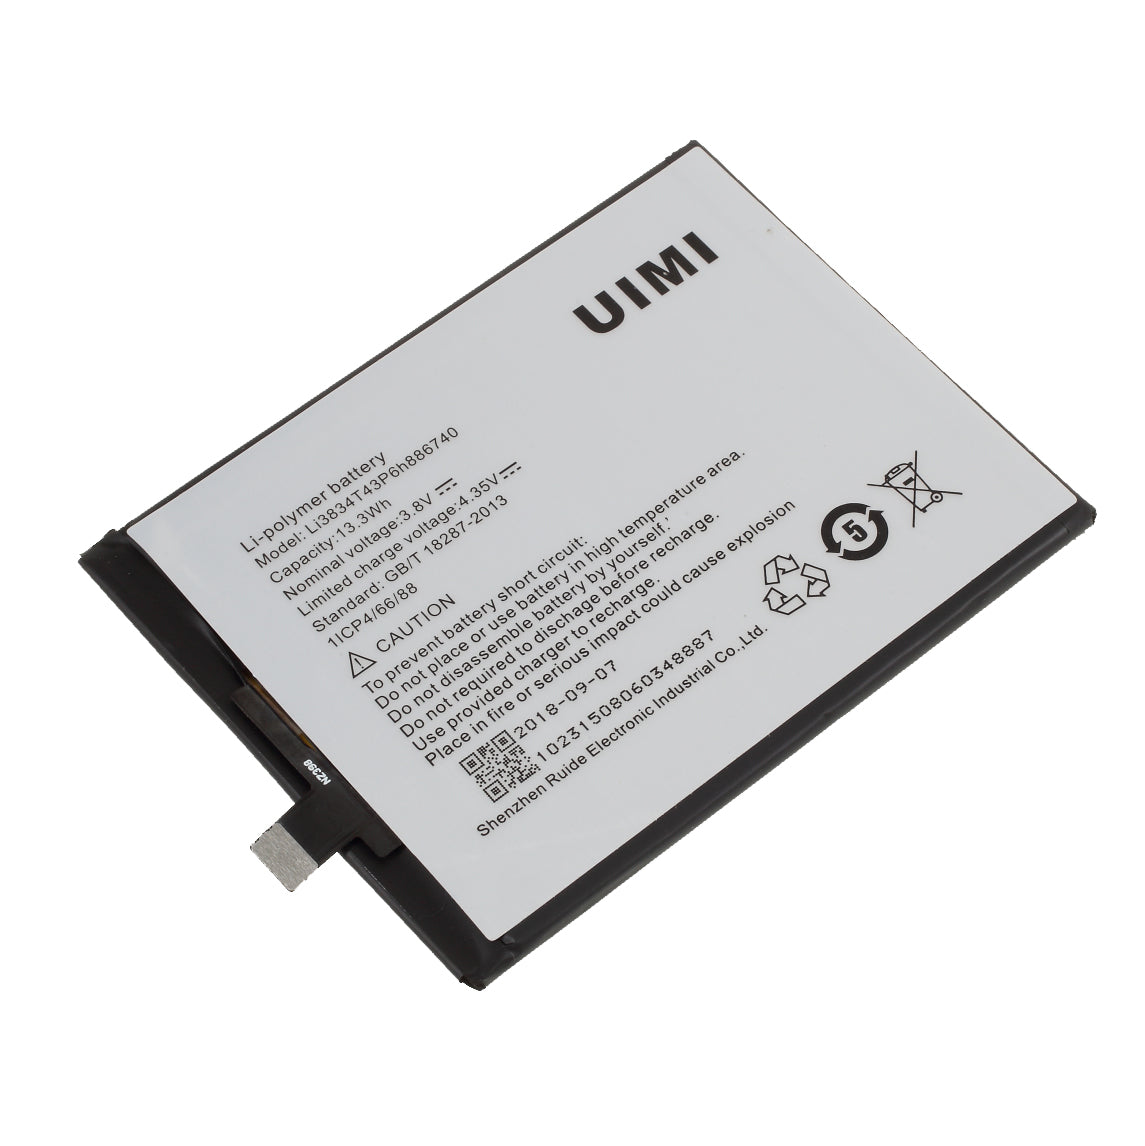 3.8V 13.3Wh Battery Repair Part for UiMi eMax iron